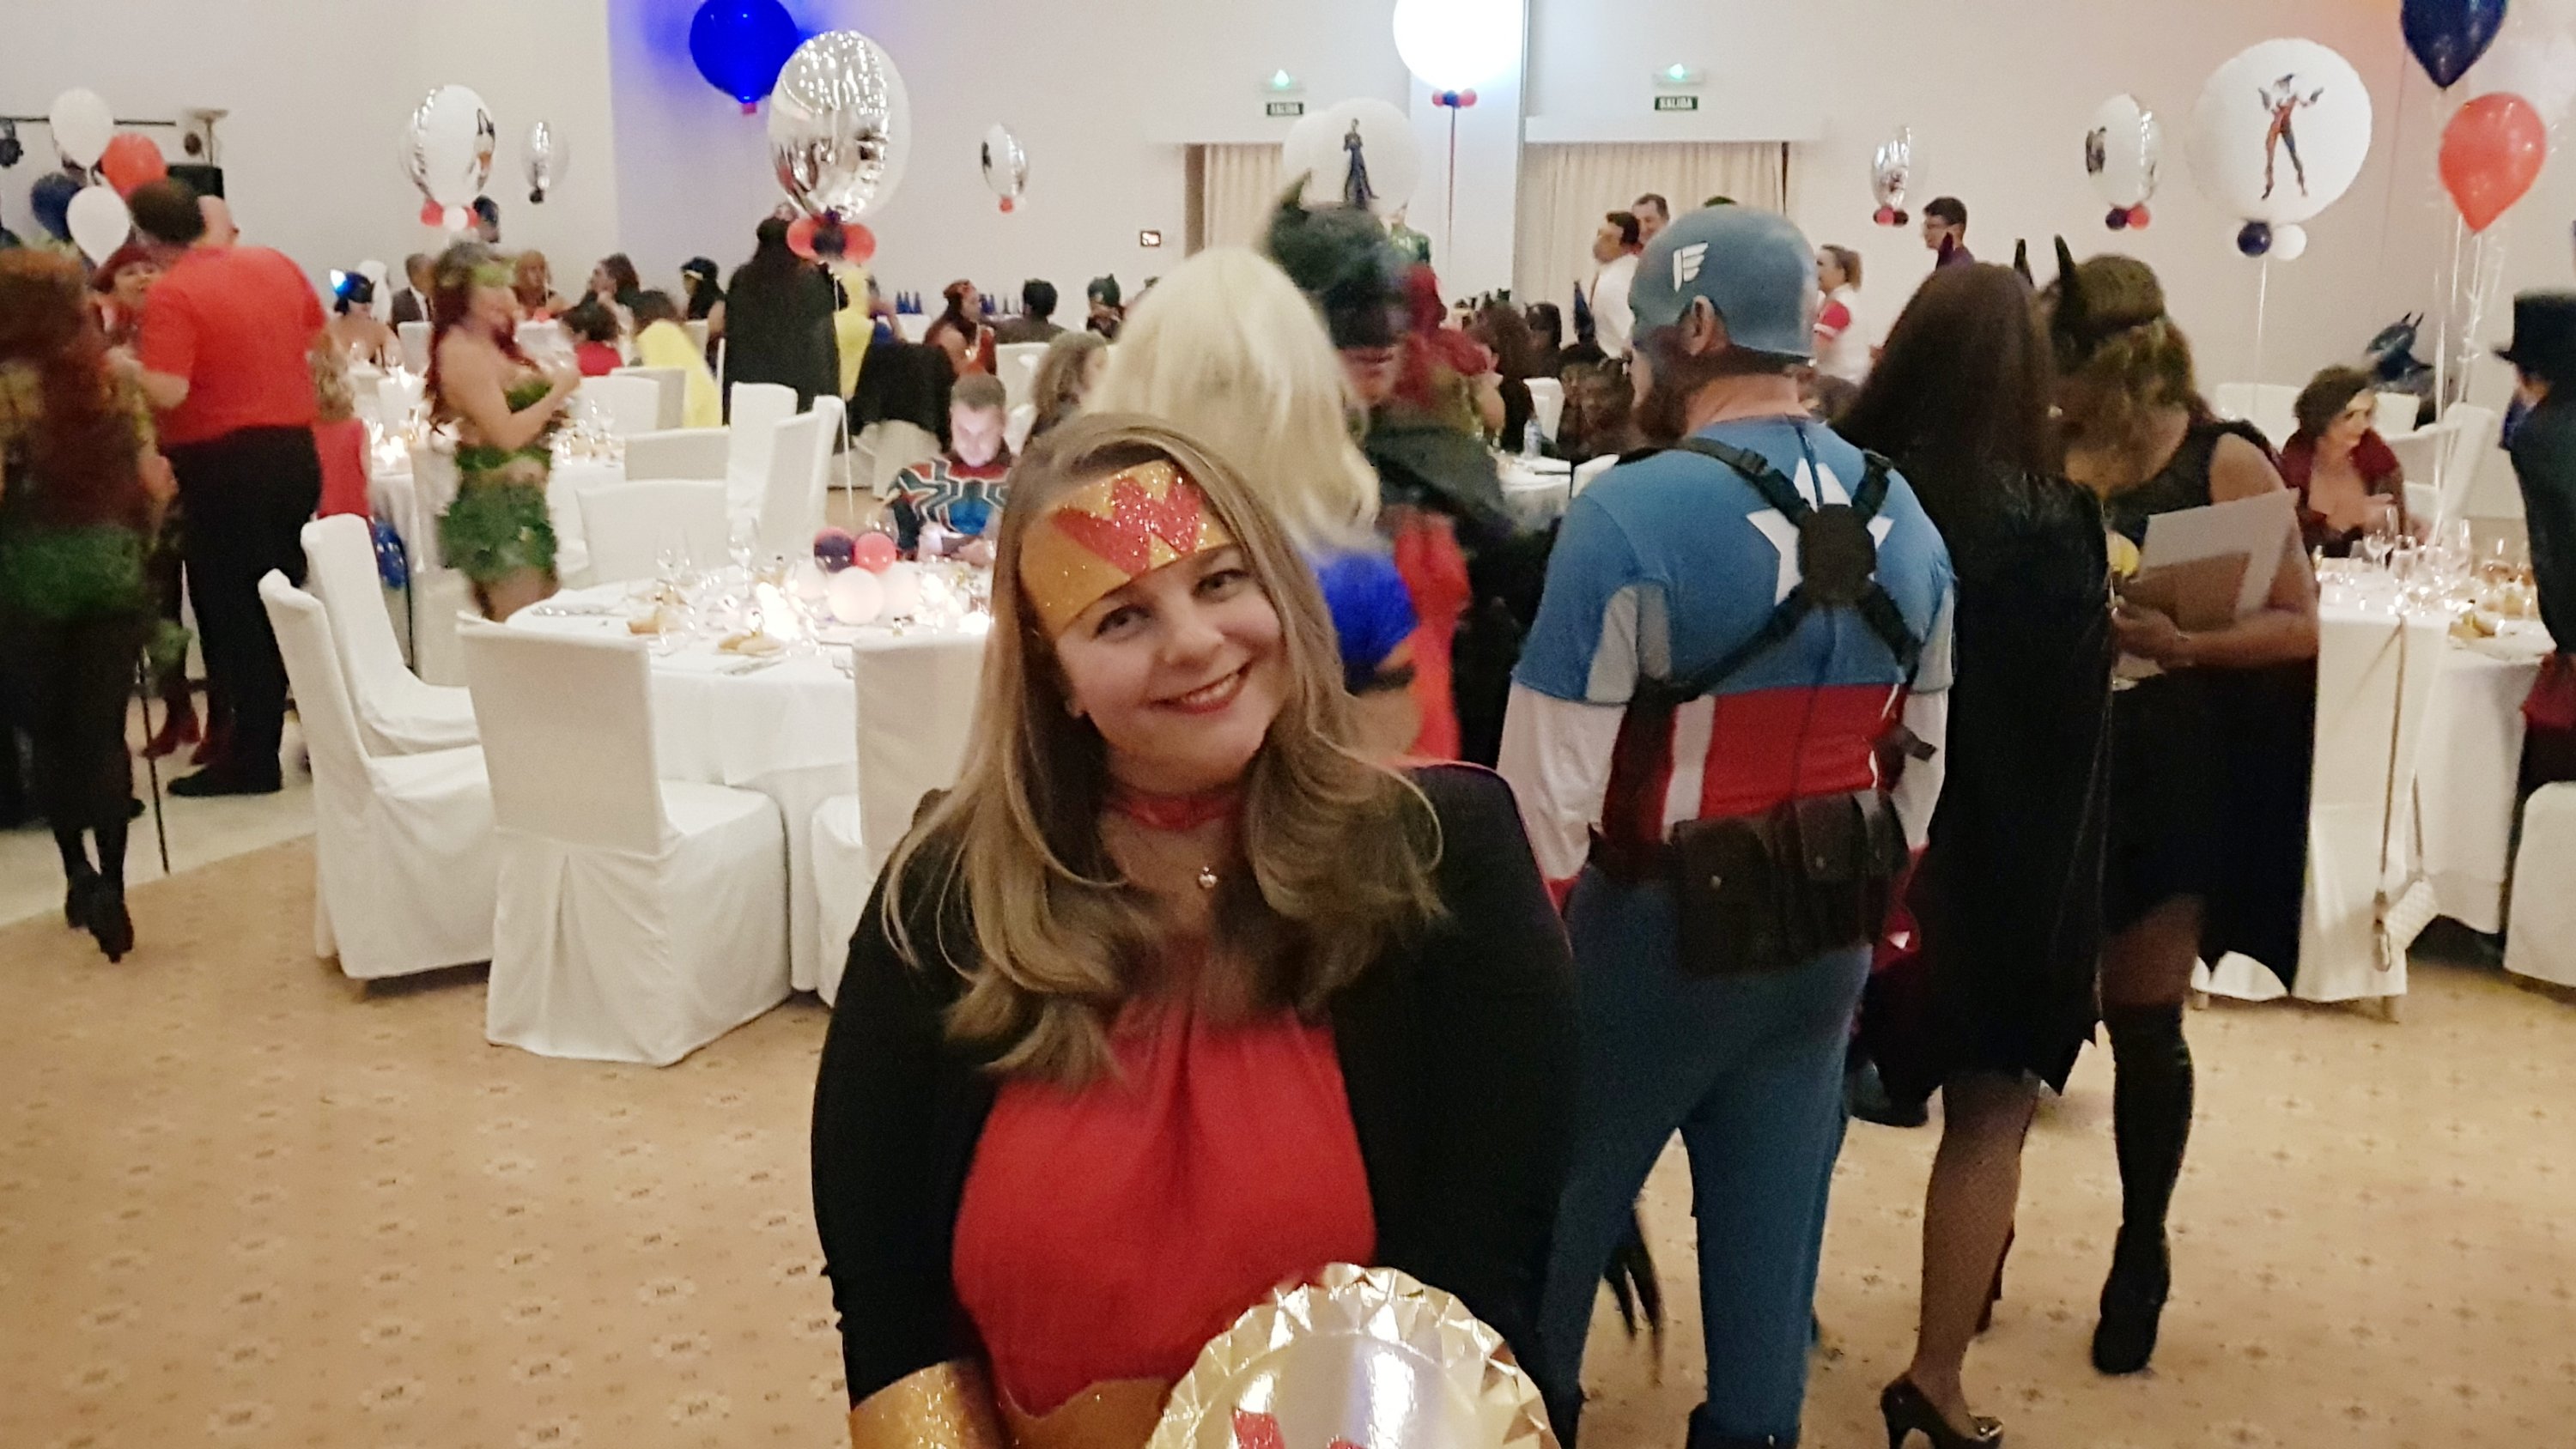 Costumes birthday party with a woman dressed as a Wonder woman in a diy costume